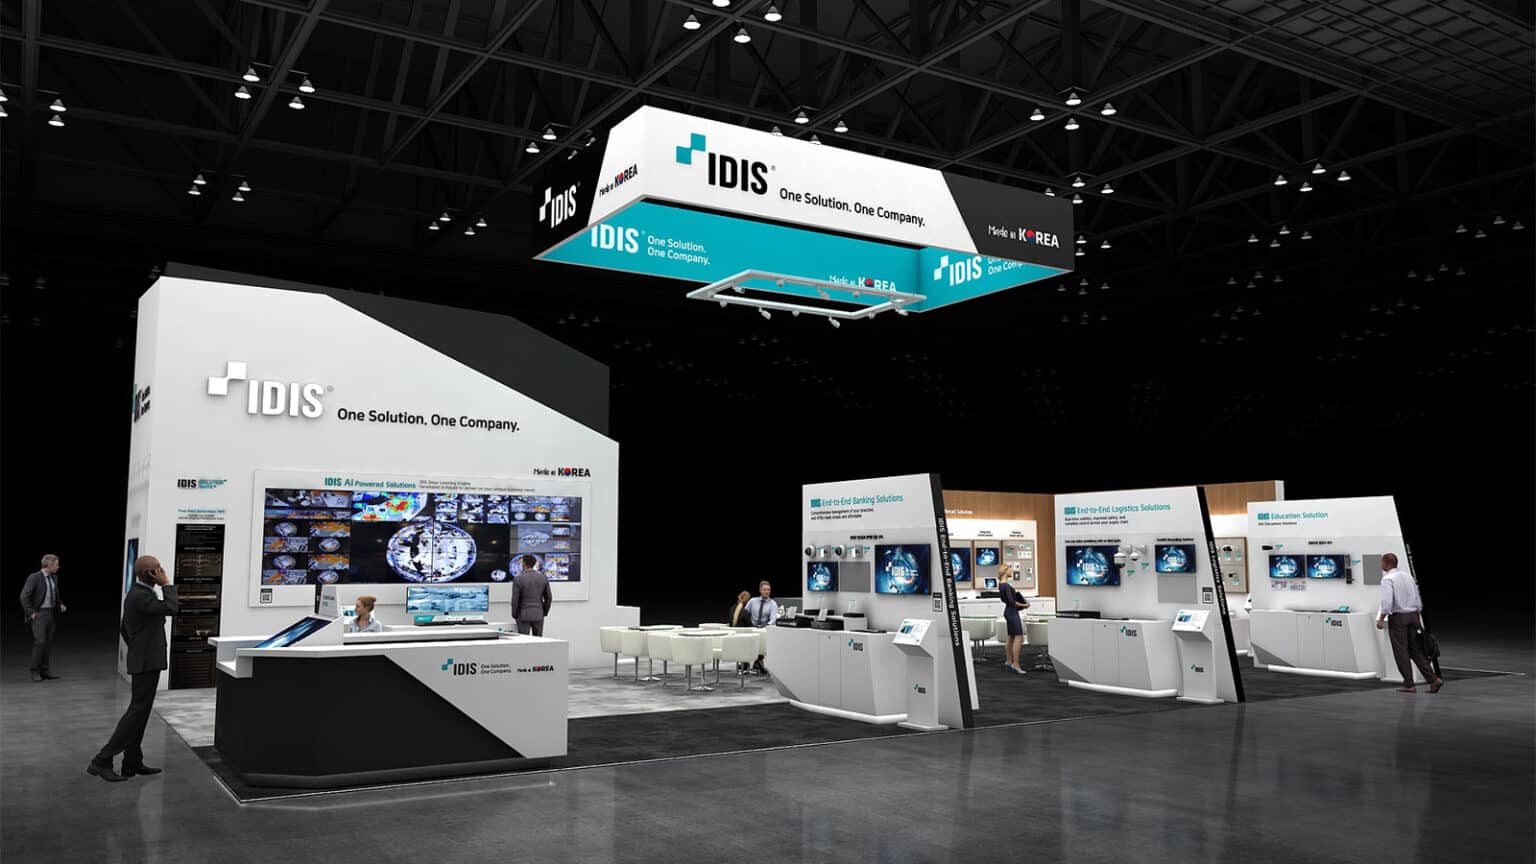 IDIS booth at ISC West